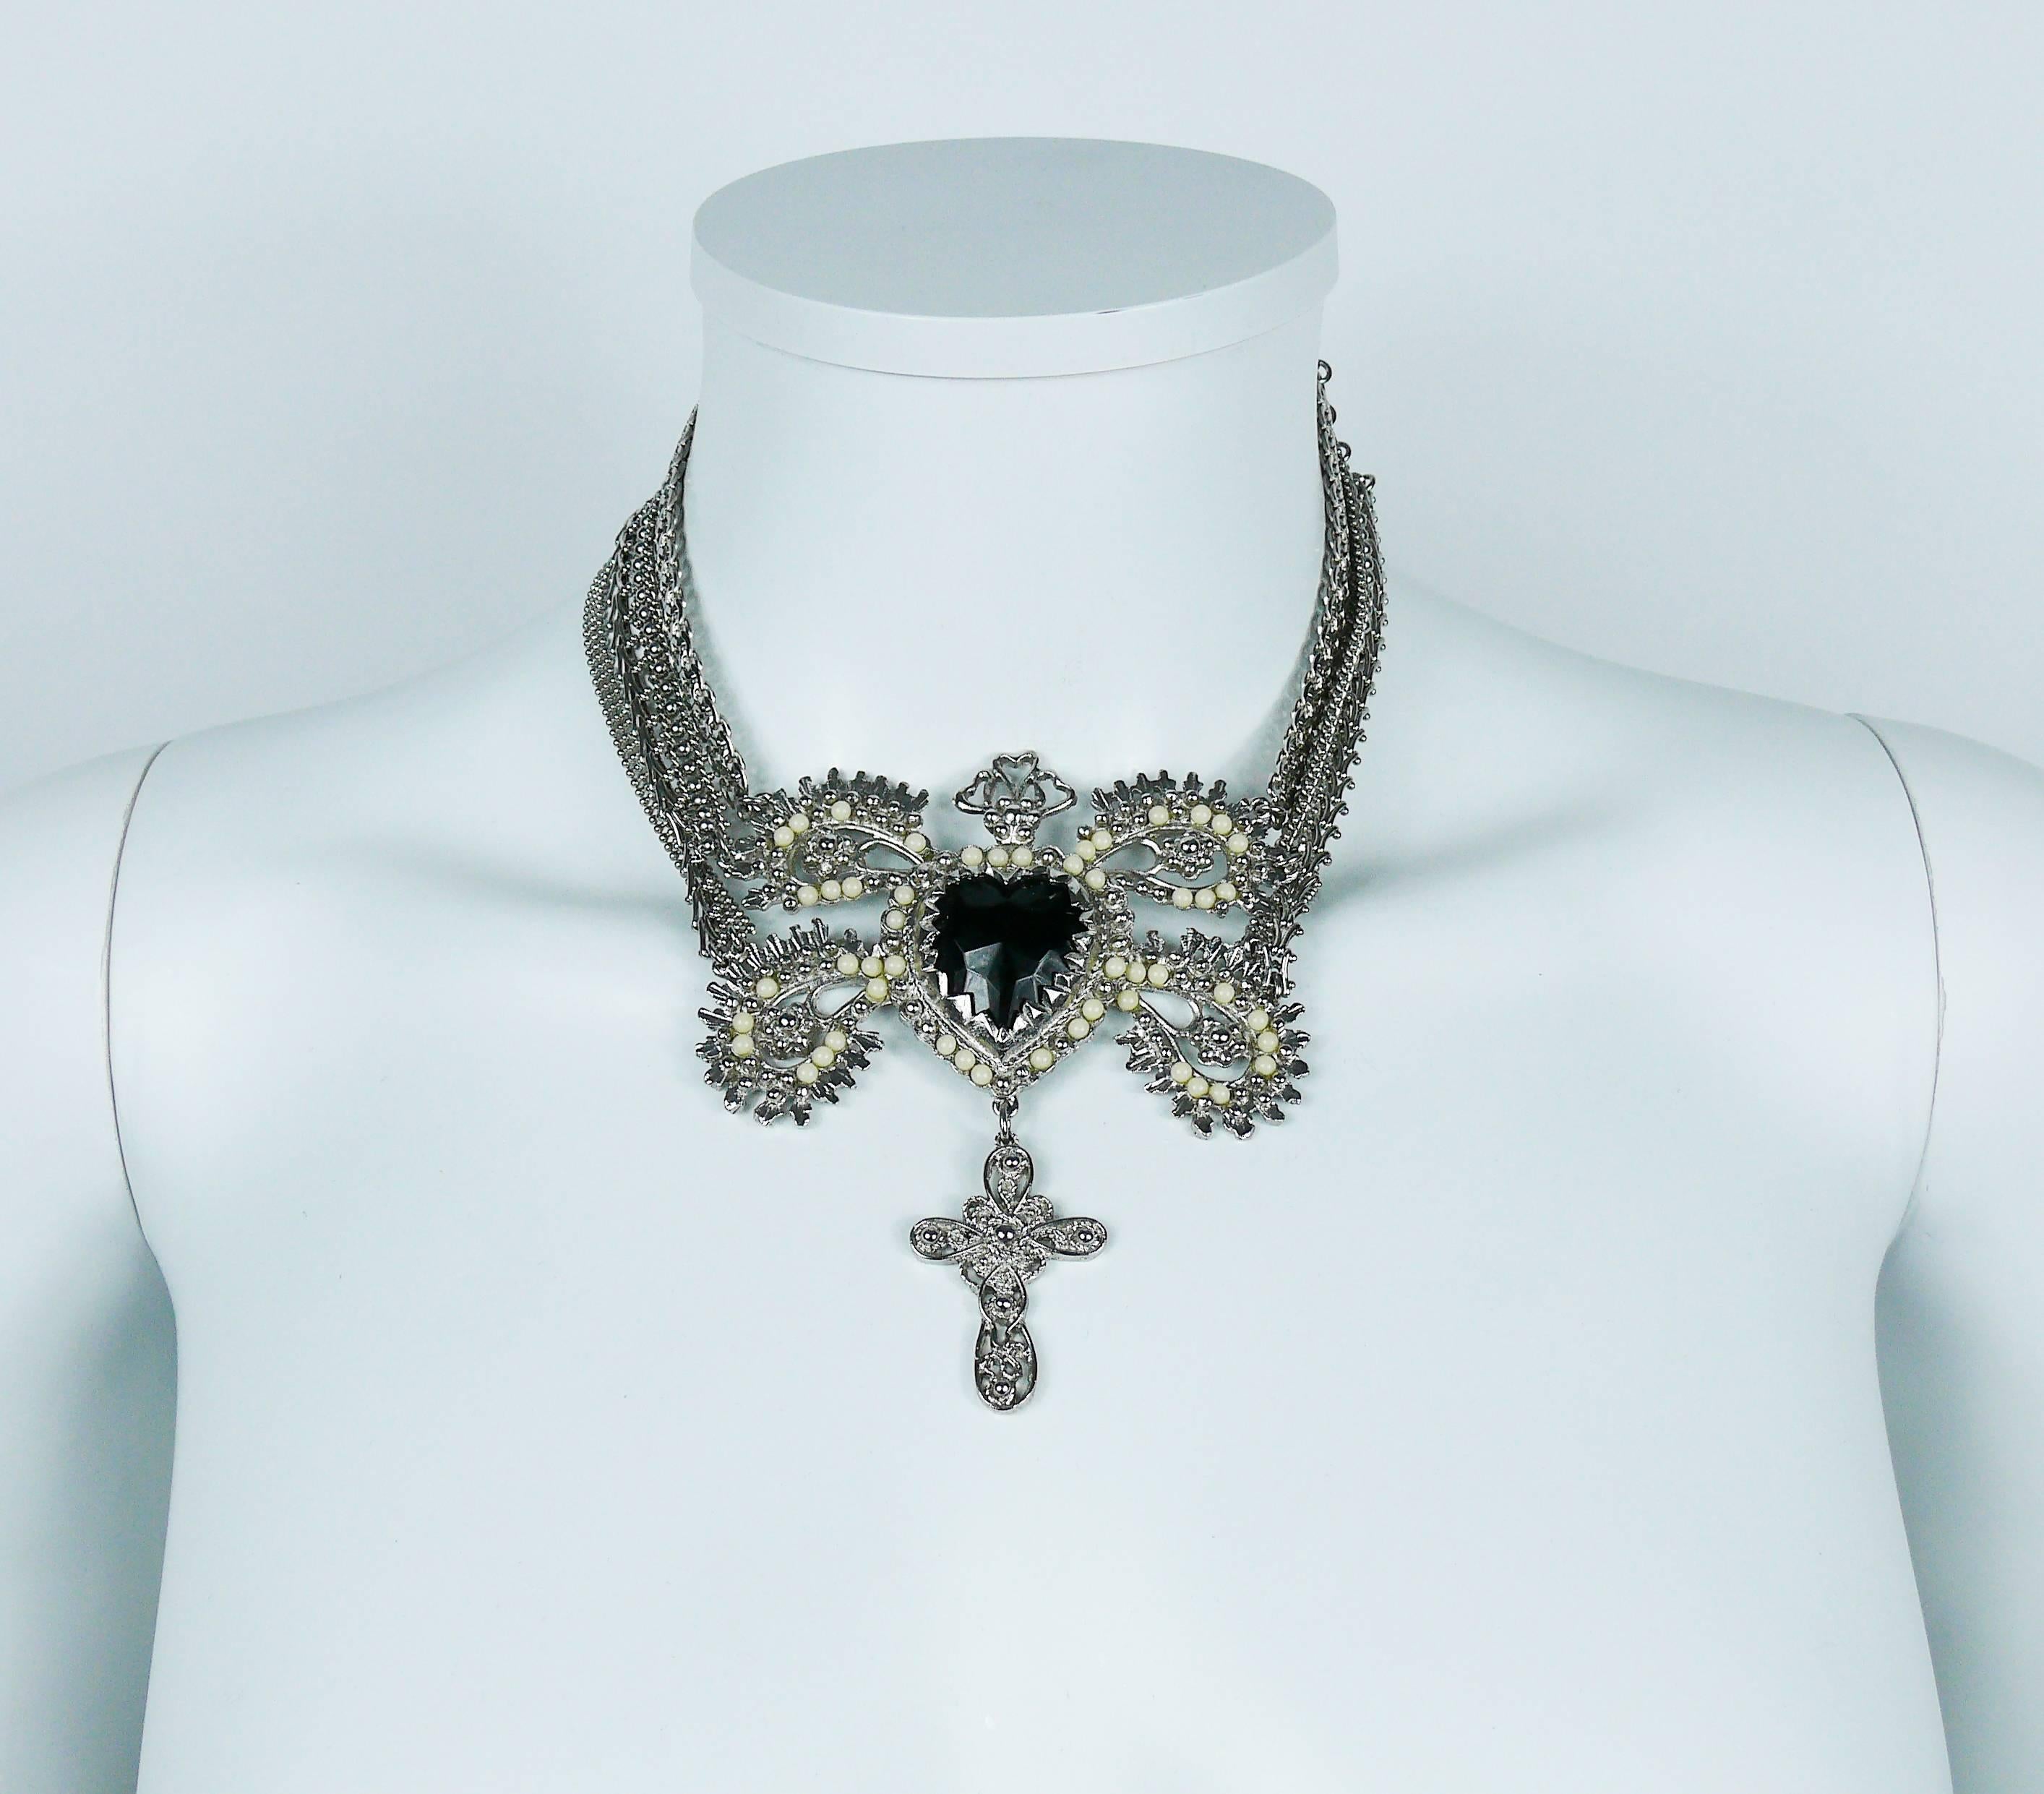 CHRISTIAN LACROIX vintage gorgeous silver toned necklace featuring an ex voto sacred heart, adorned with boteh-like design, embellished with a large black glass cabochon and off-white pearls.

This necklace also features a cross charm and four